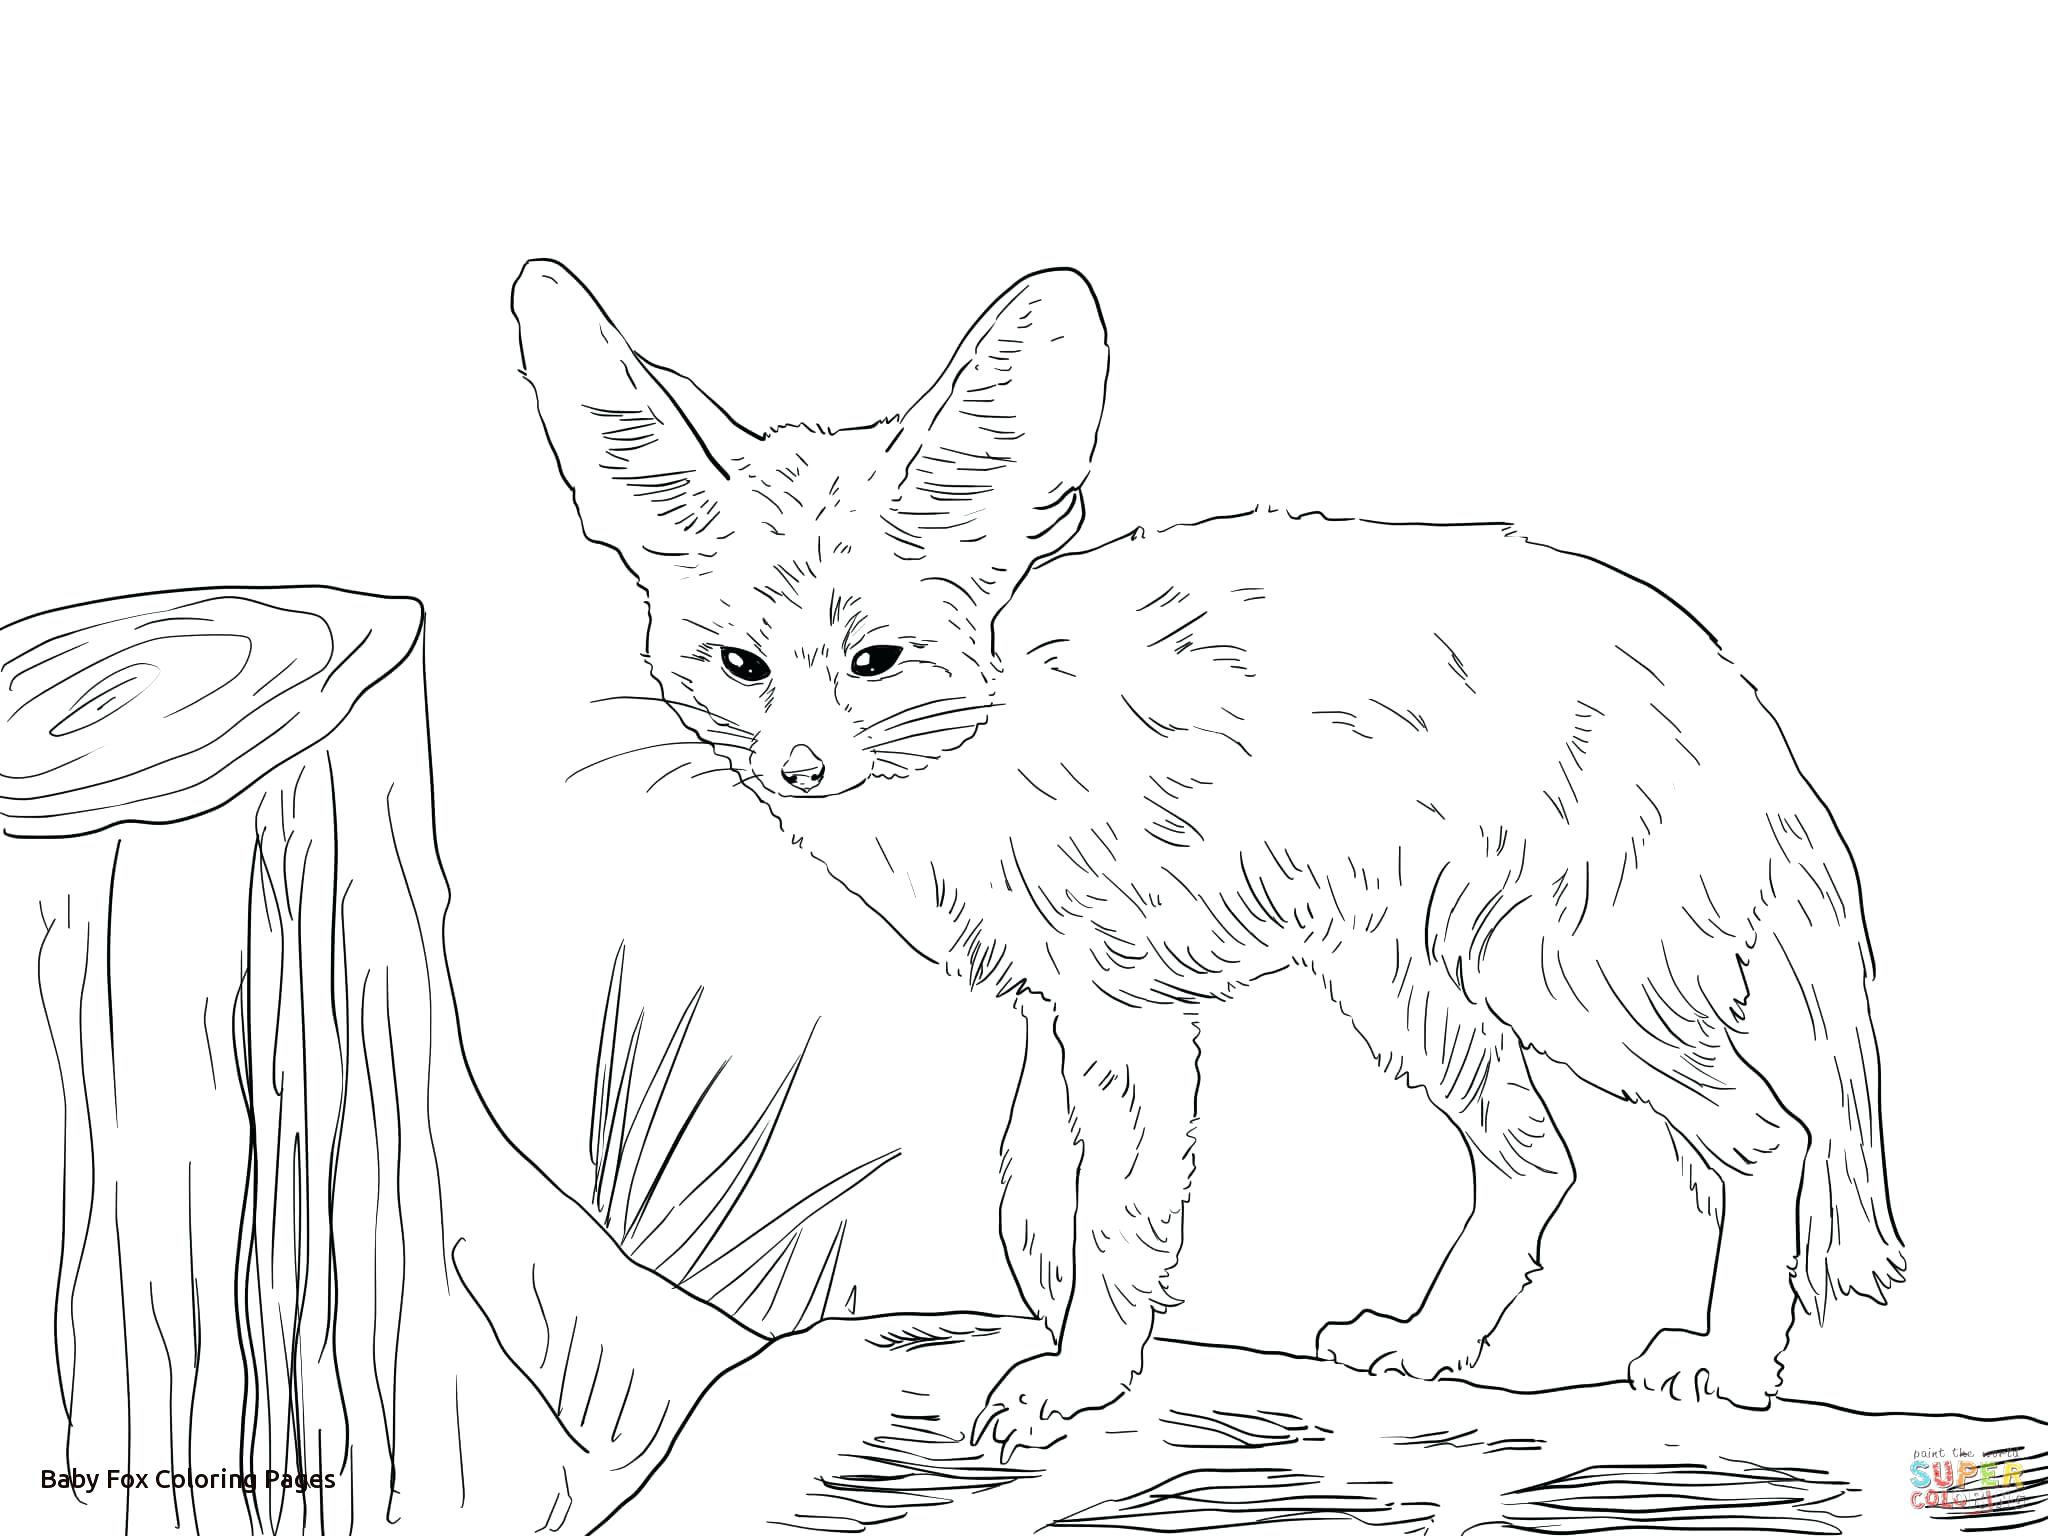 Baby Fox Coloring Pages at GetColorings.com | Free printable colorings